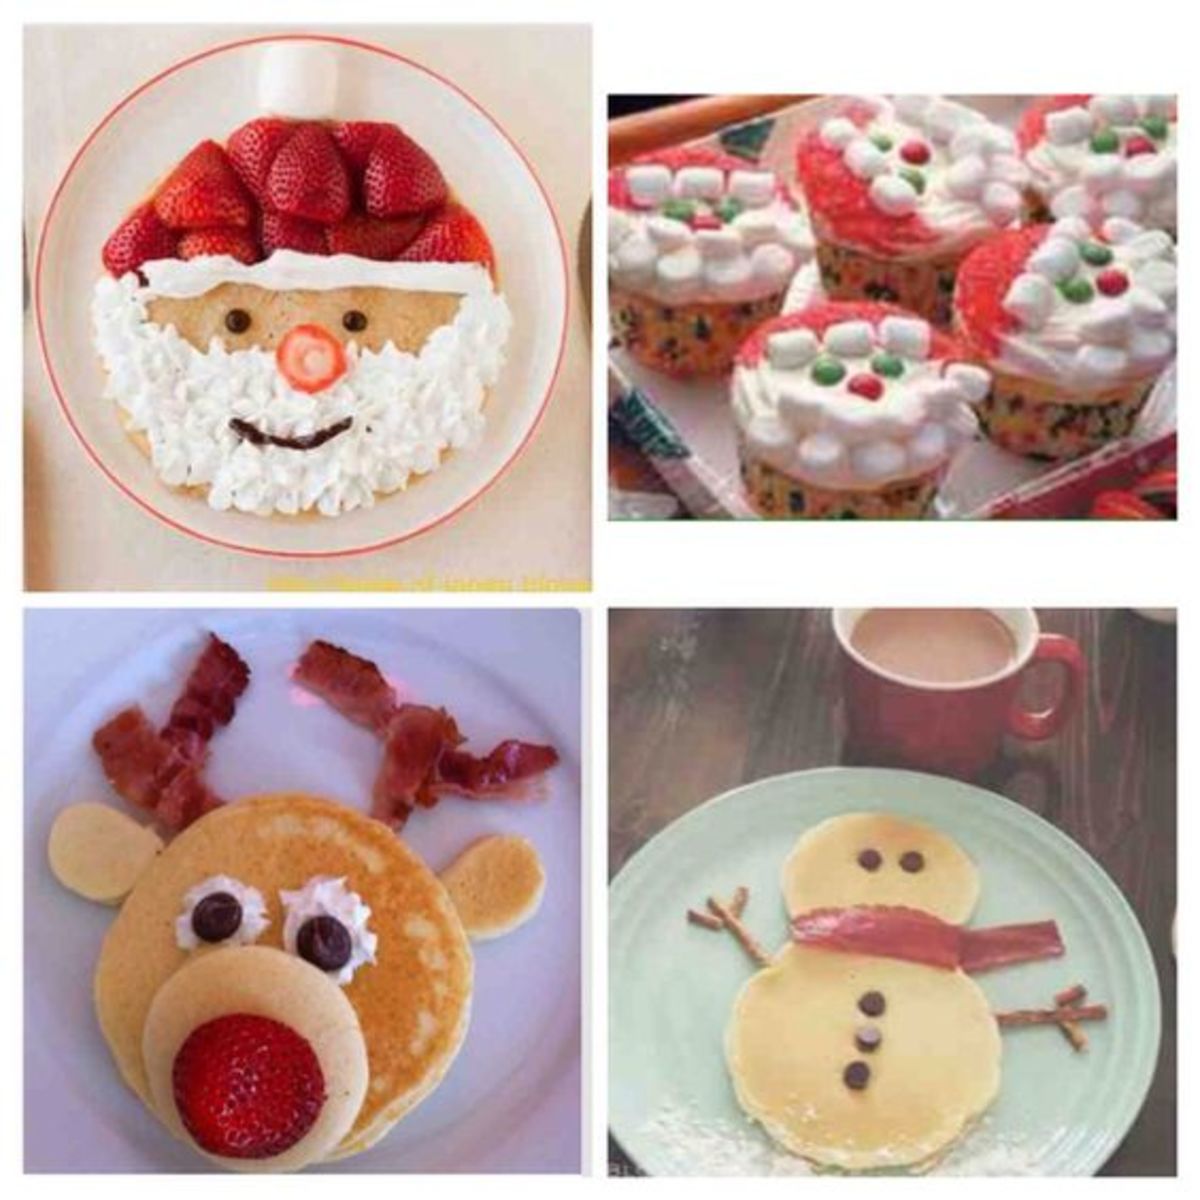 30+ Adorable Christmas Breakfast Ideas That are Truly Scrumptious